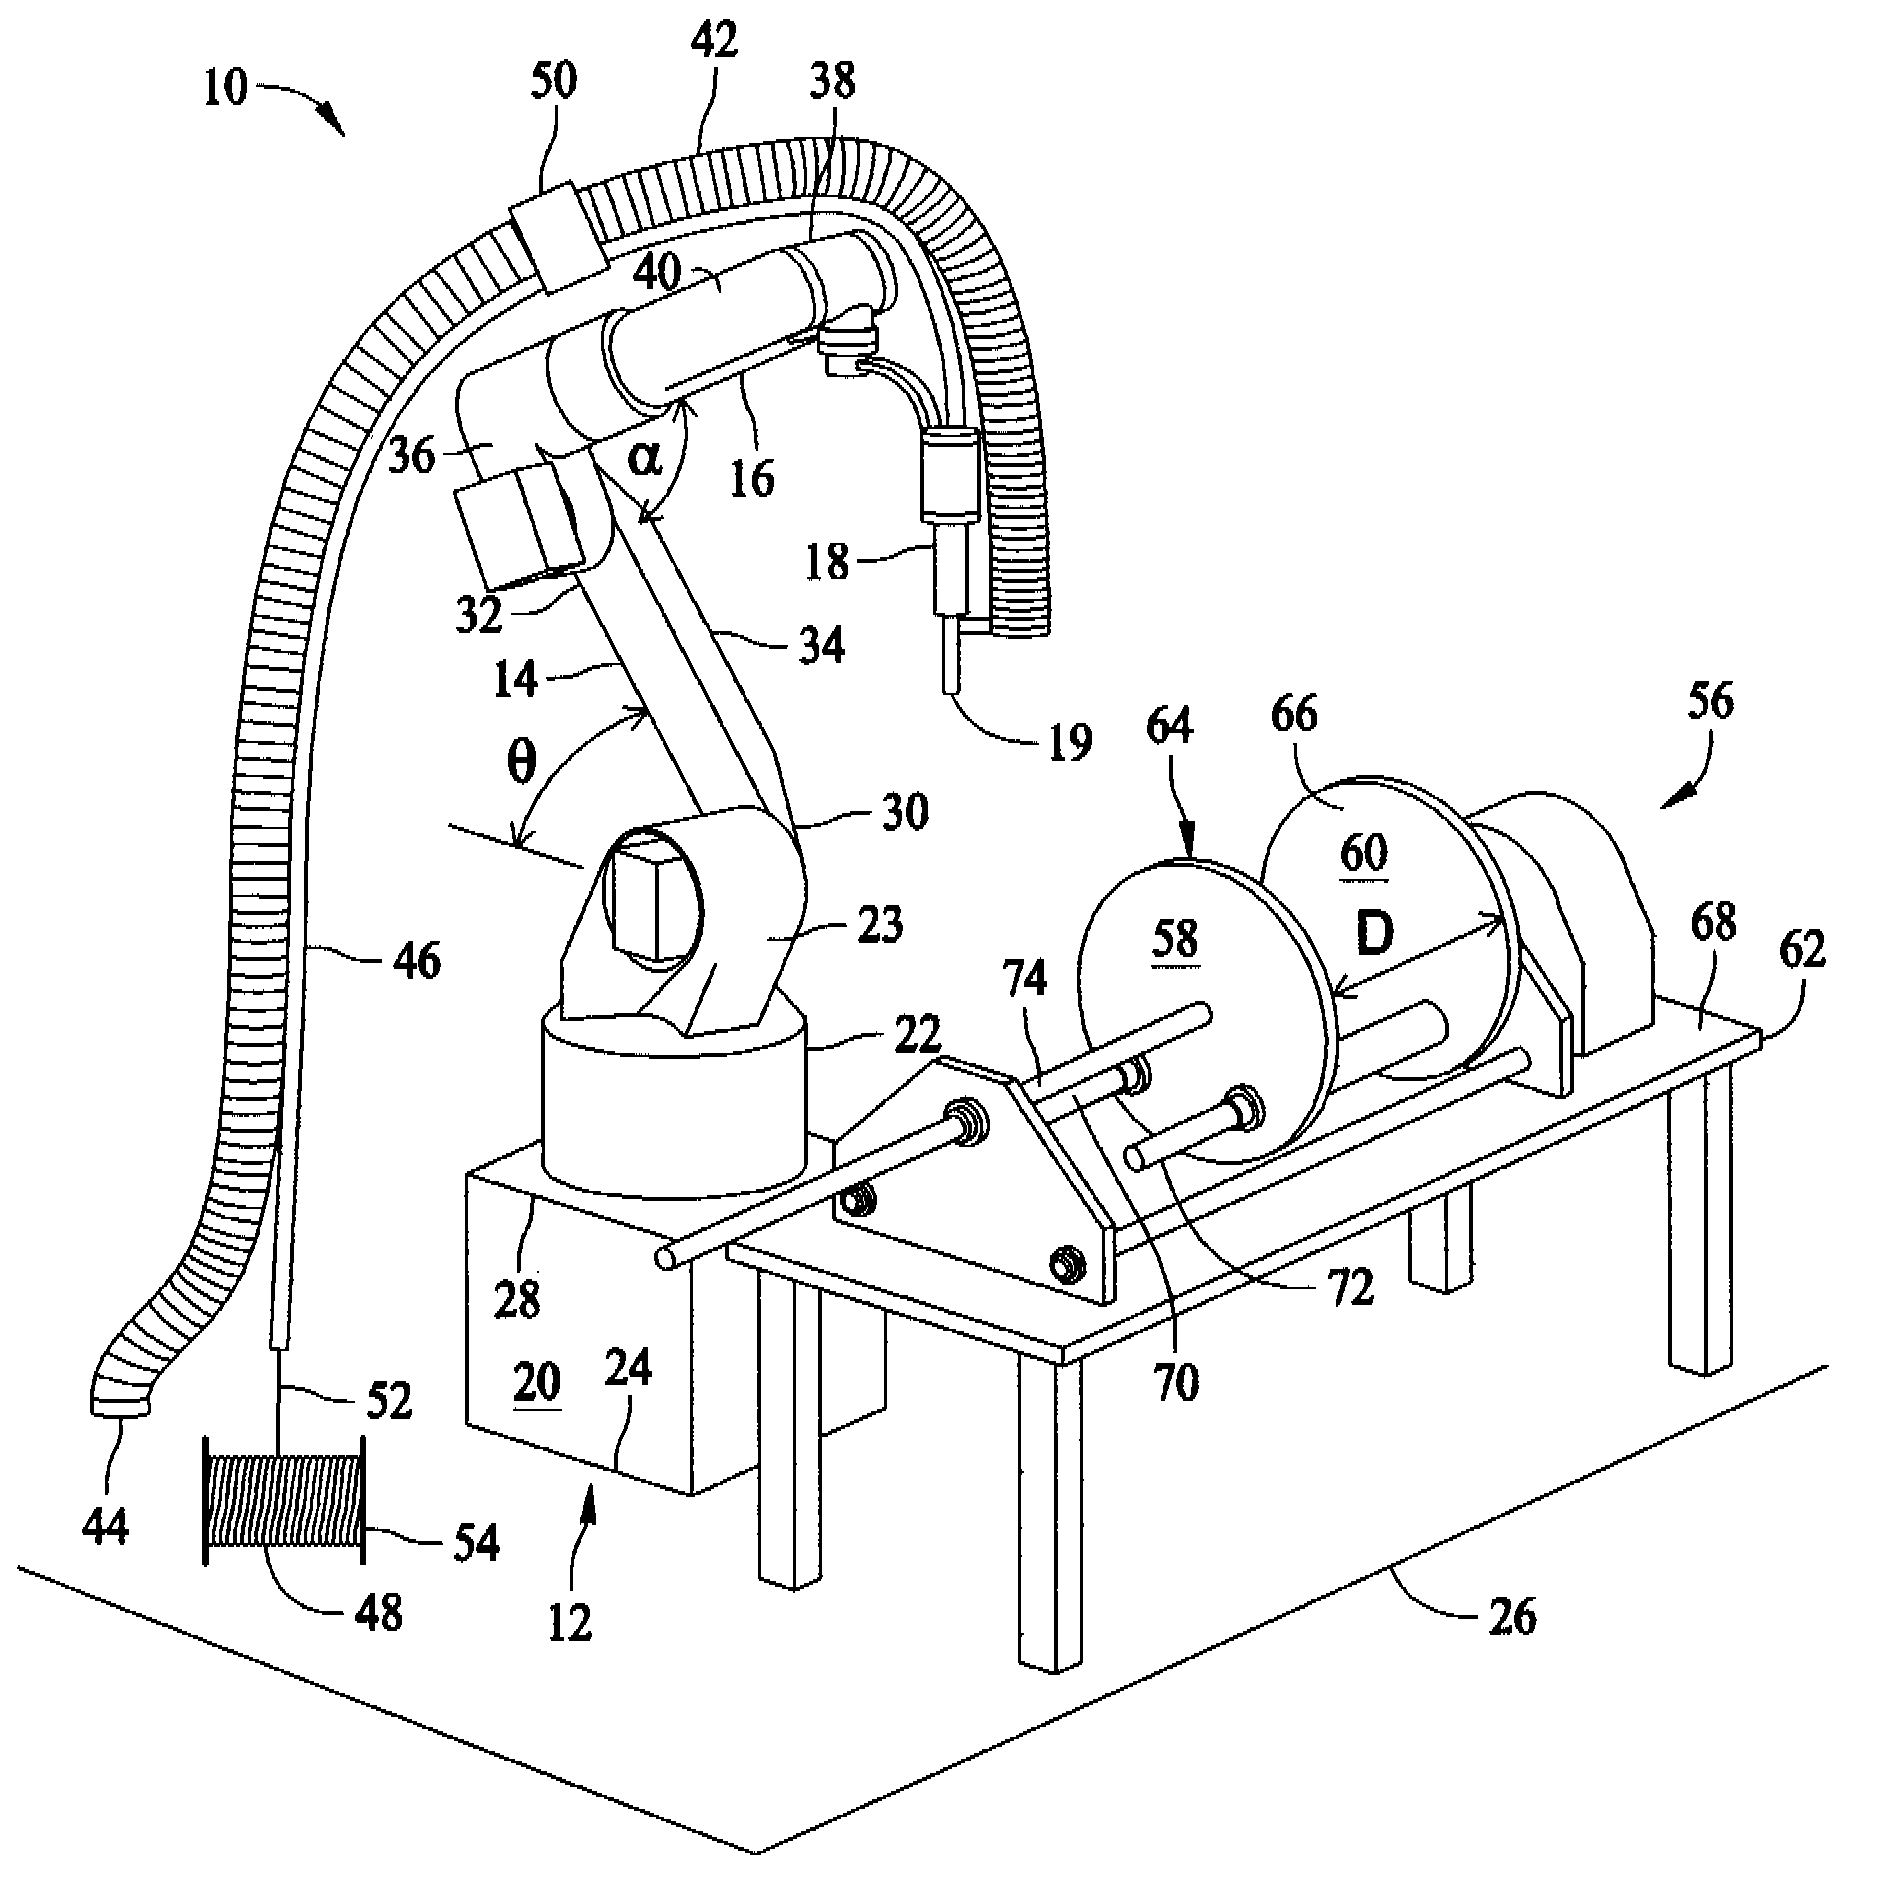 Method and system of welding a bearing